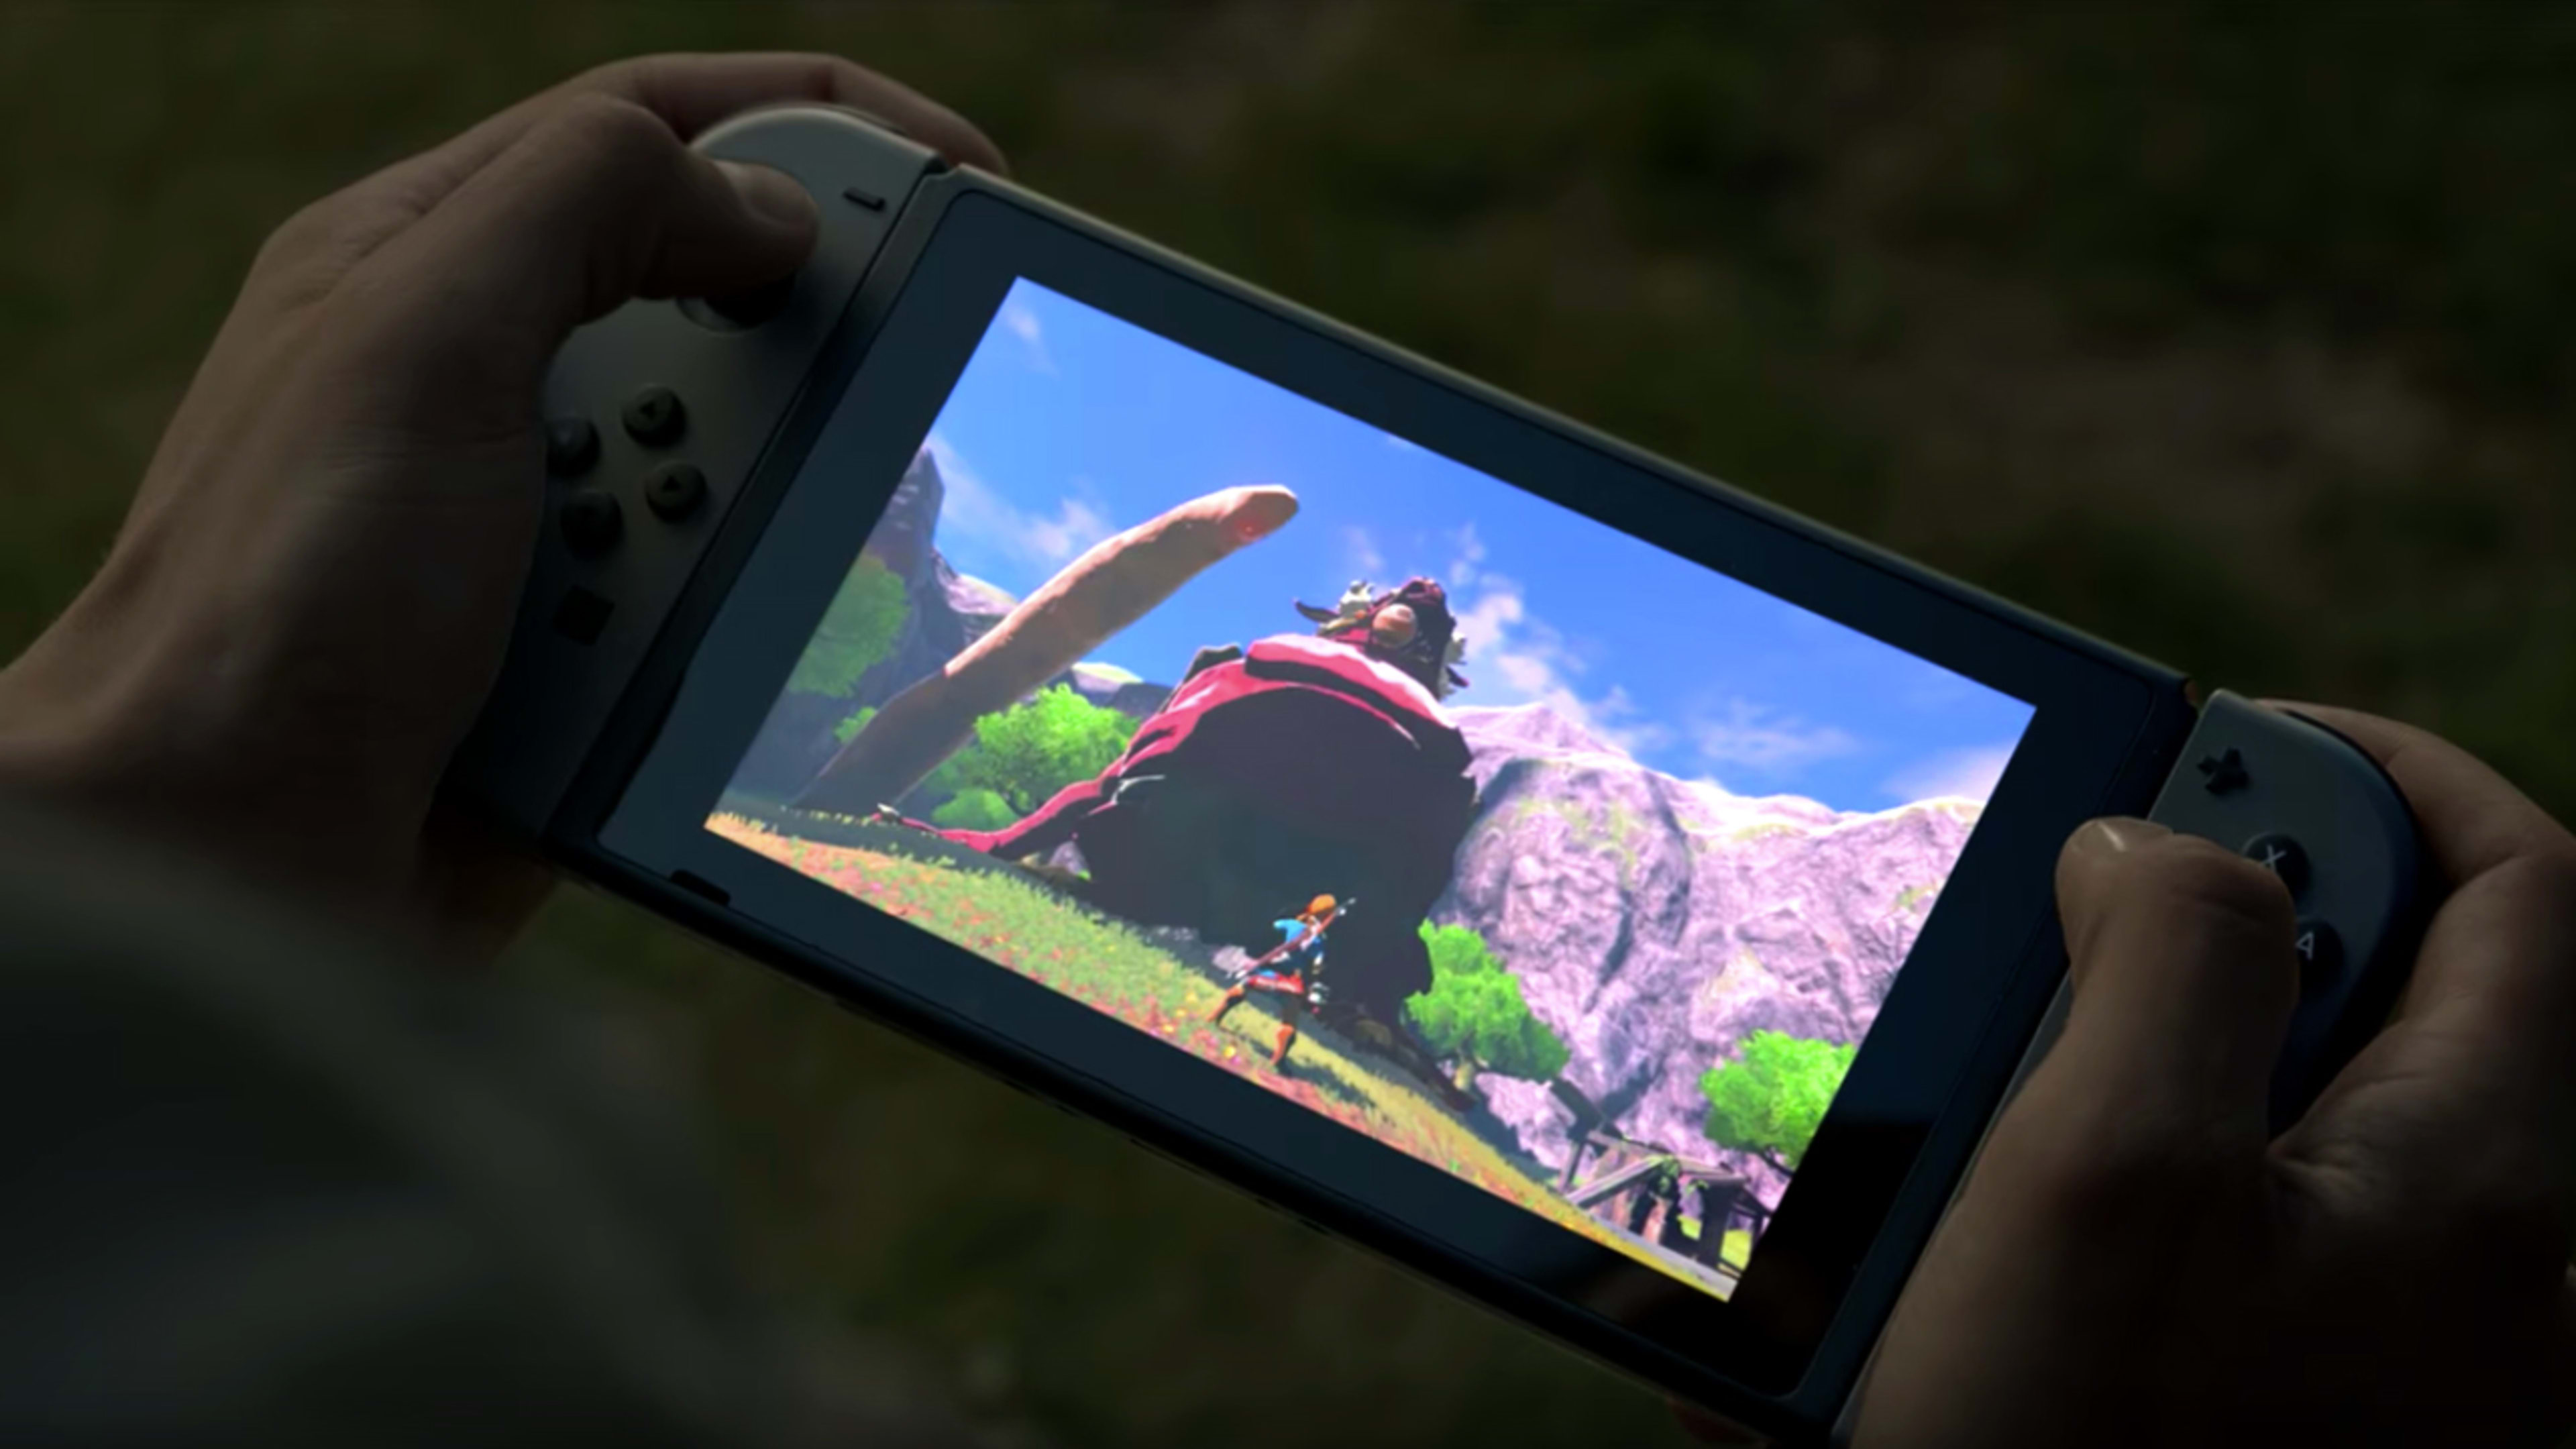 Nintendo Switch sales hit 10 million units, could outdo the Wii